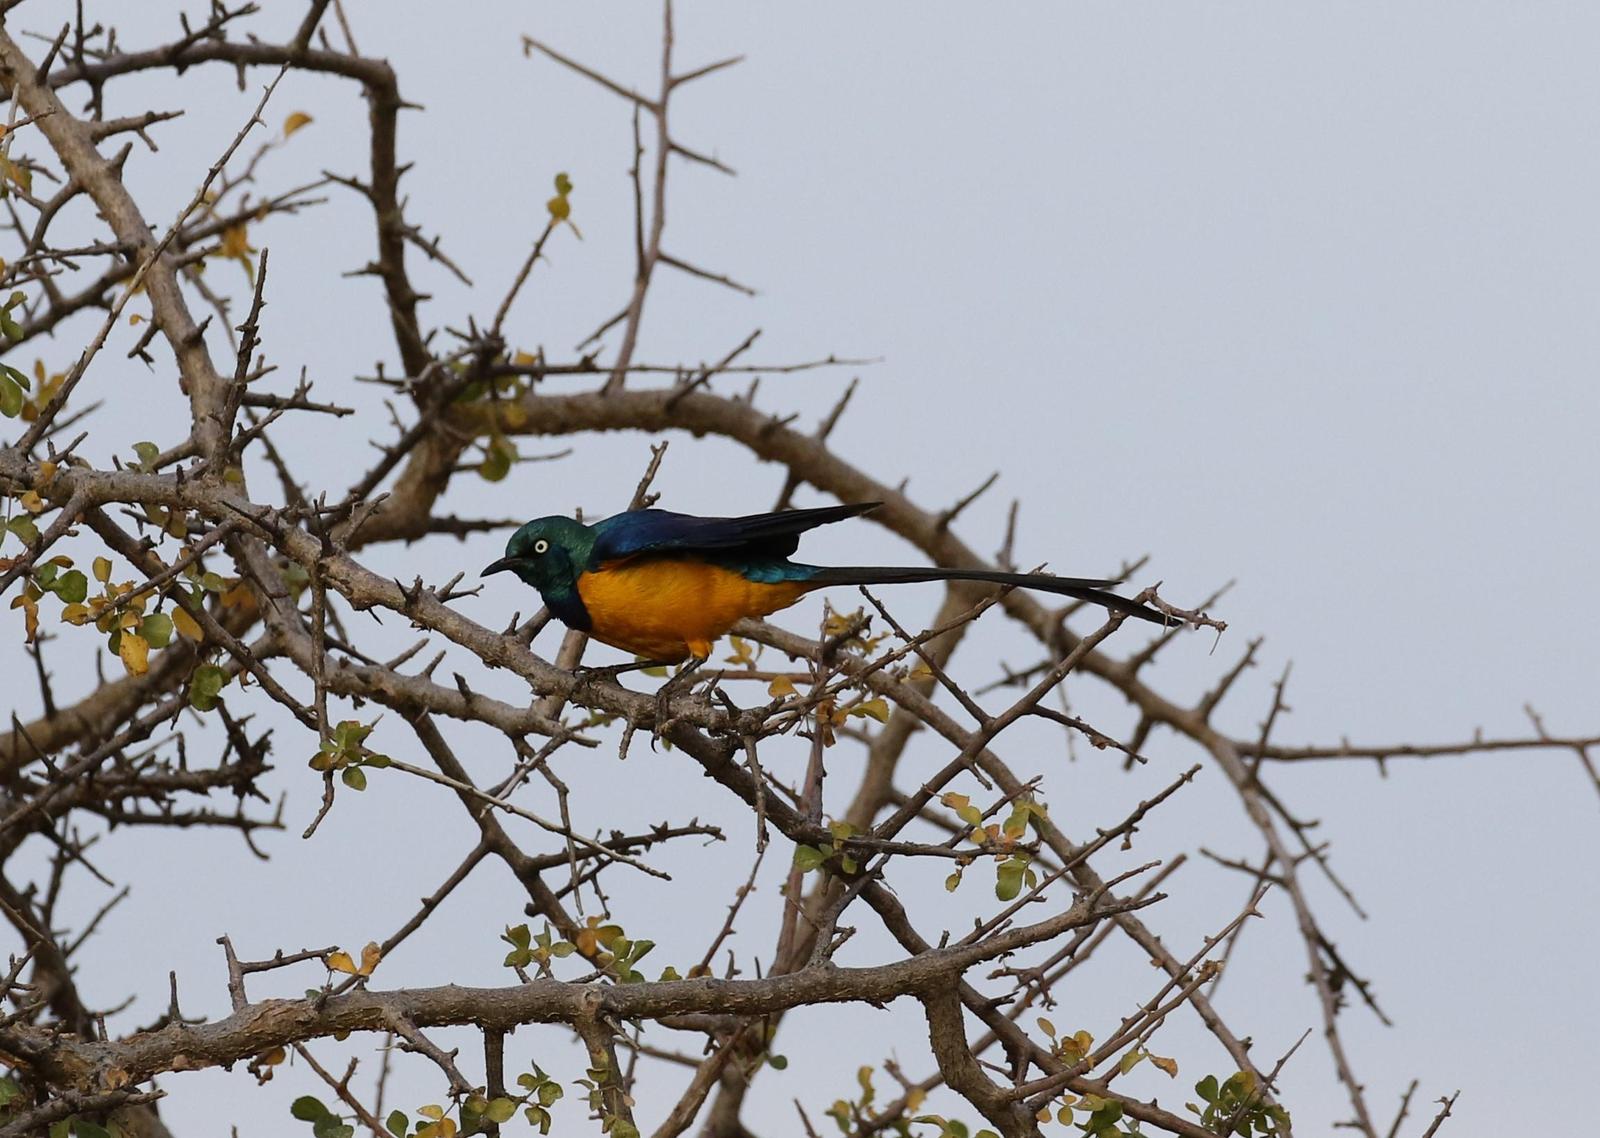 Golden-breasted Starling Photo by Nate Dias